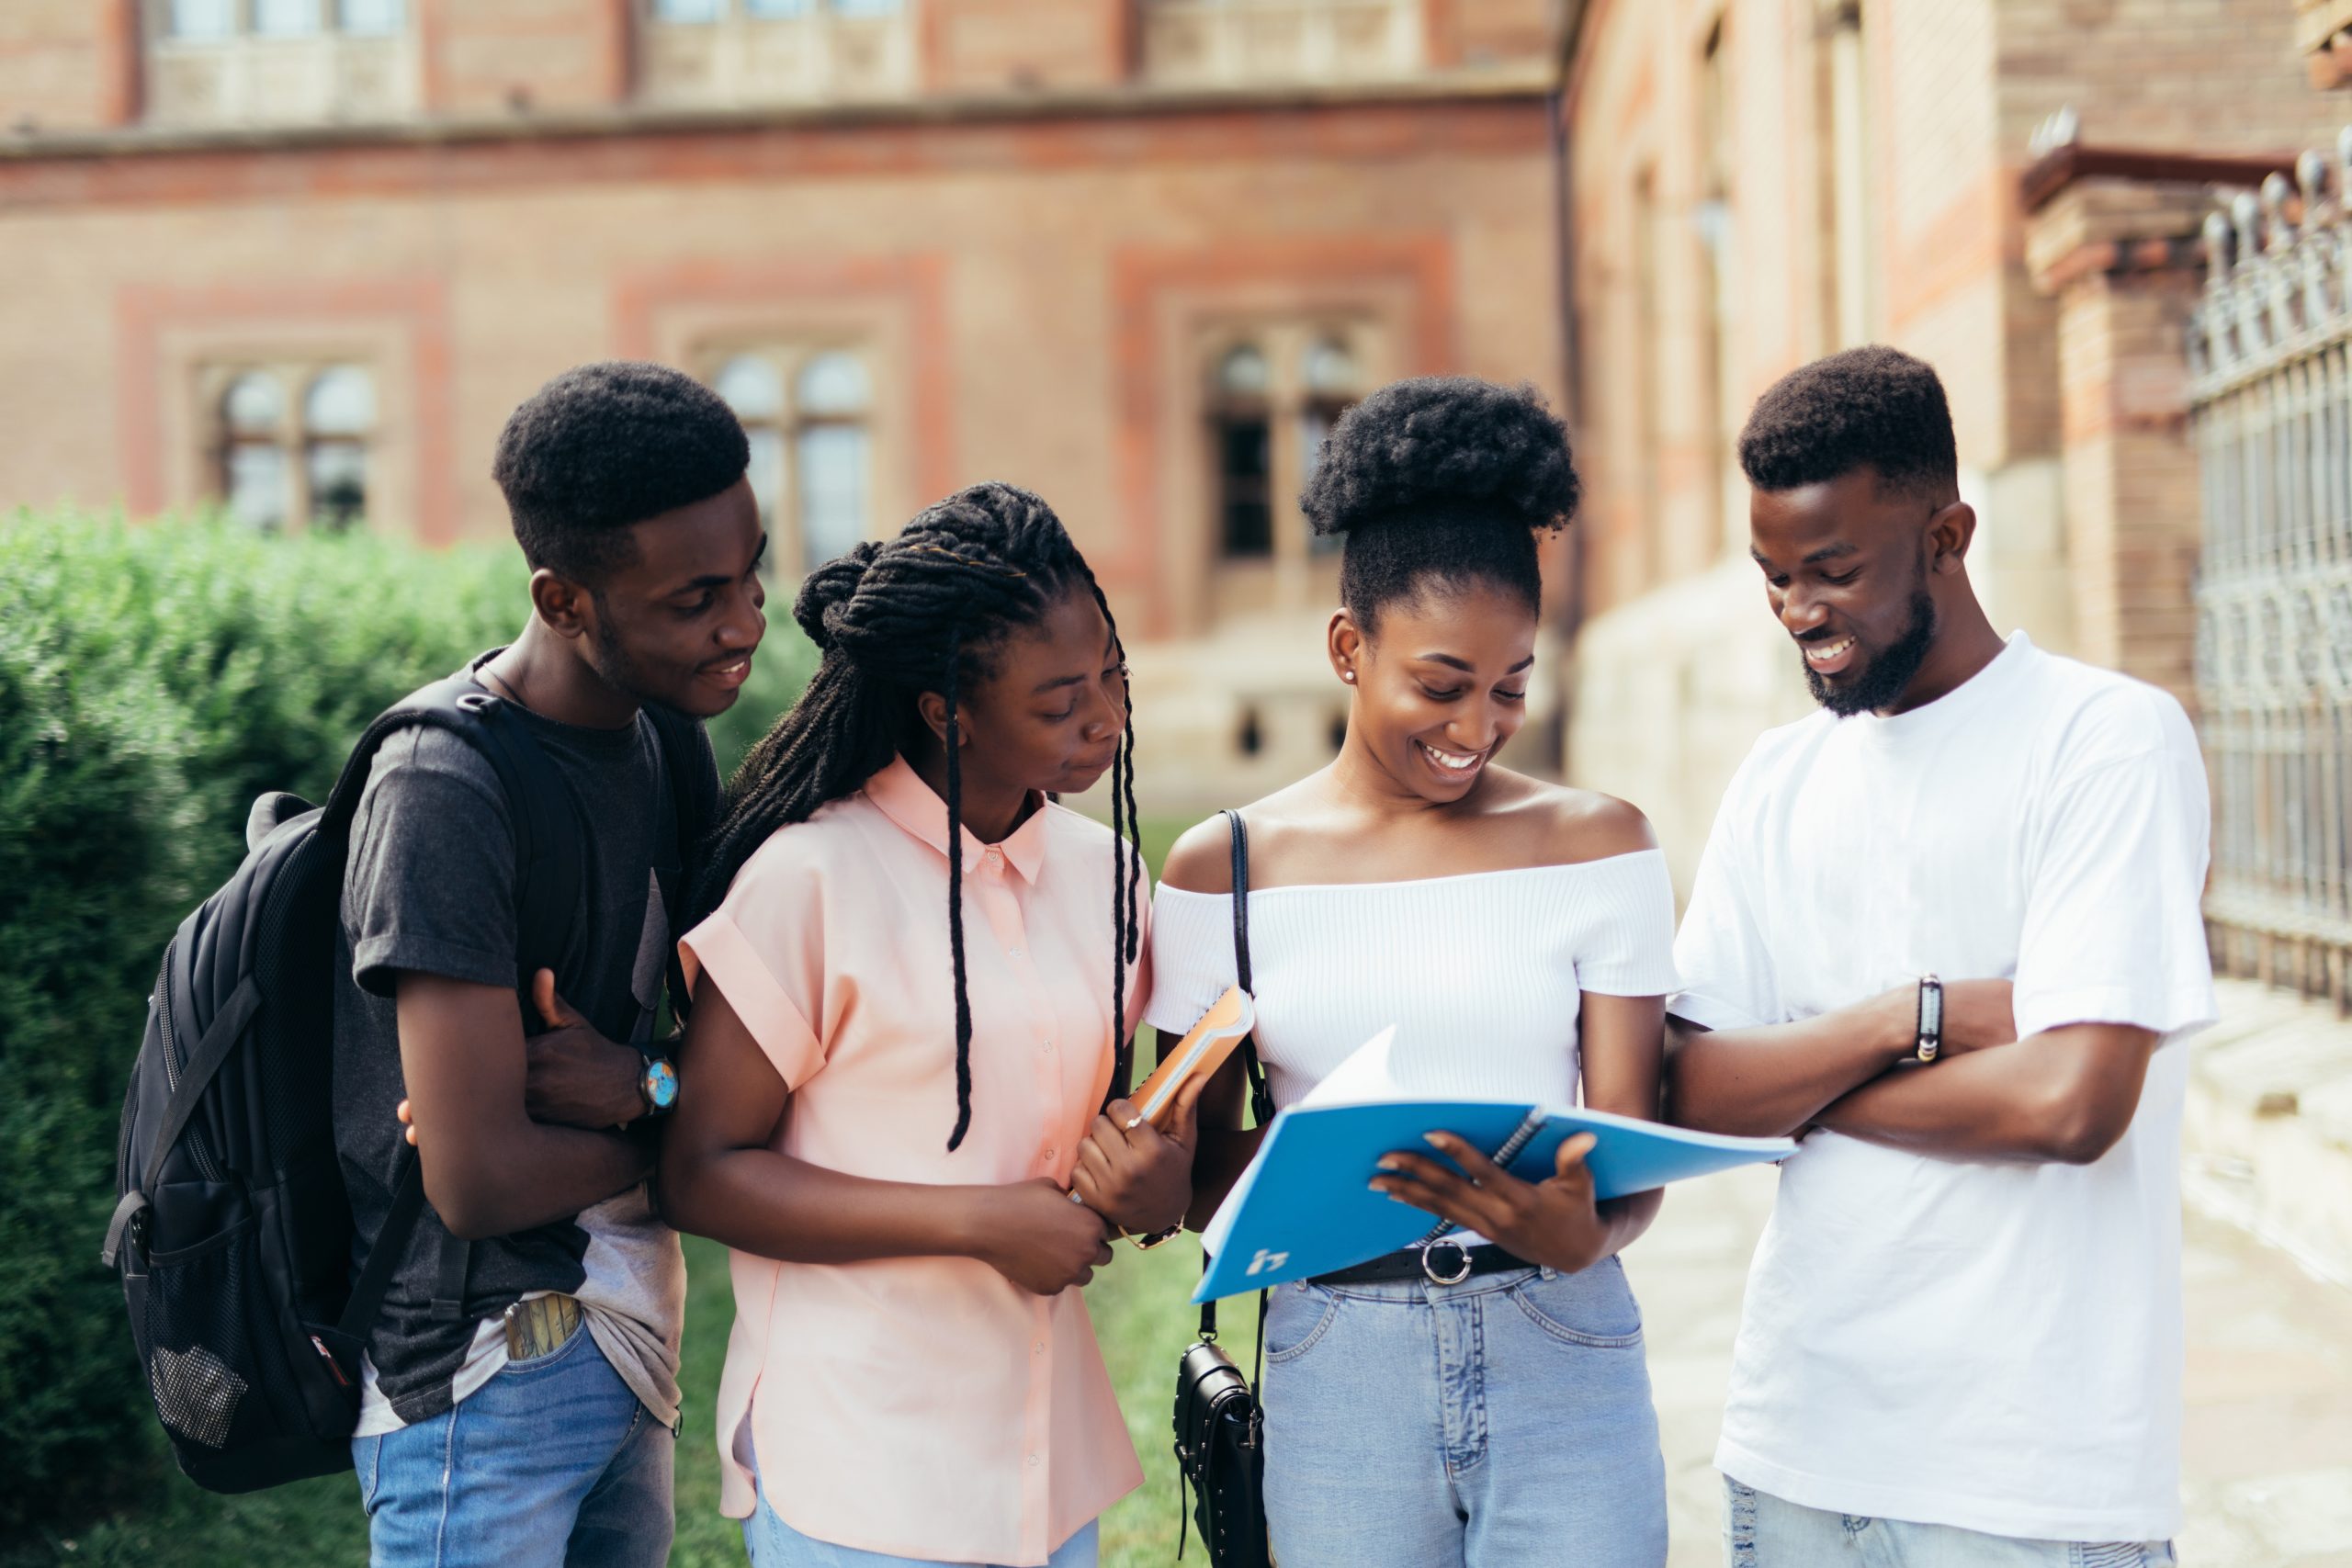 Group of young african people are studying together in university. Students outdoors.